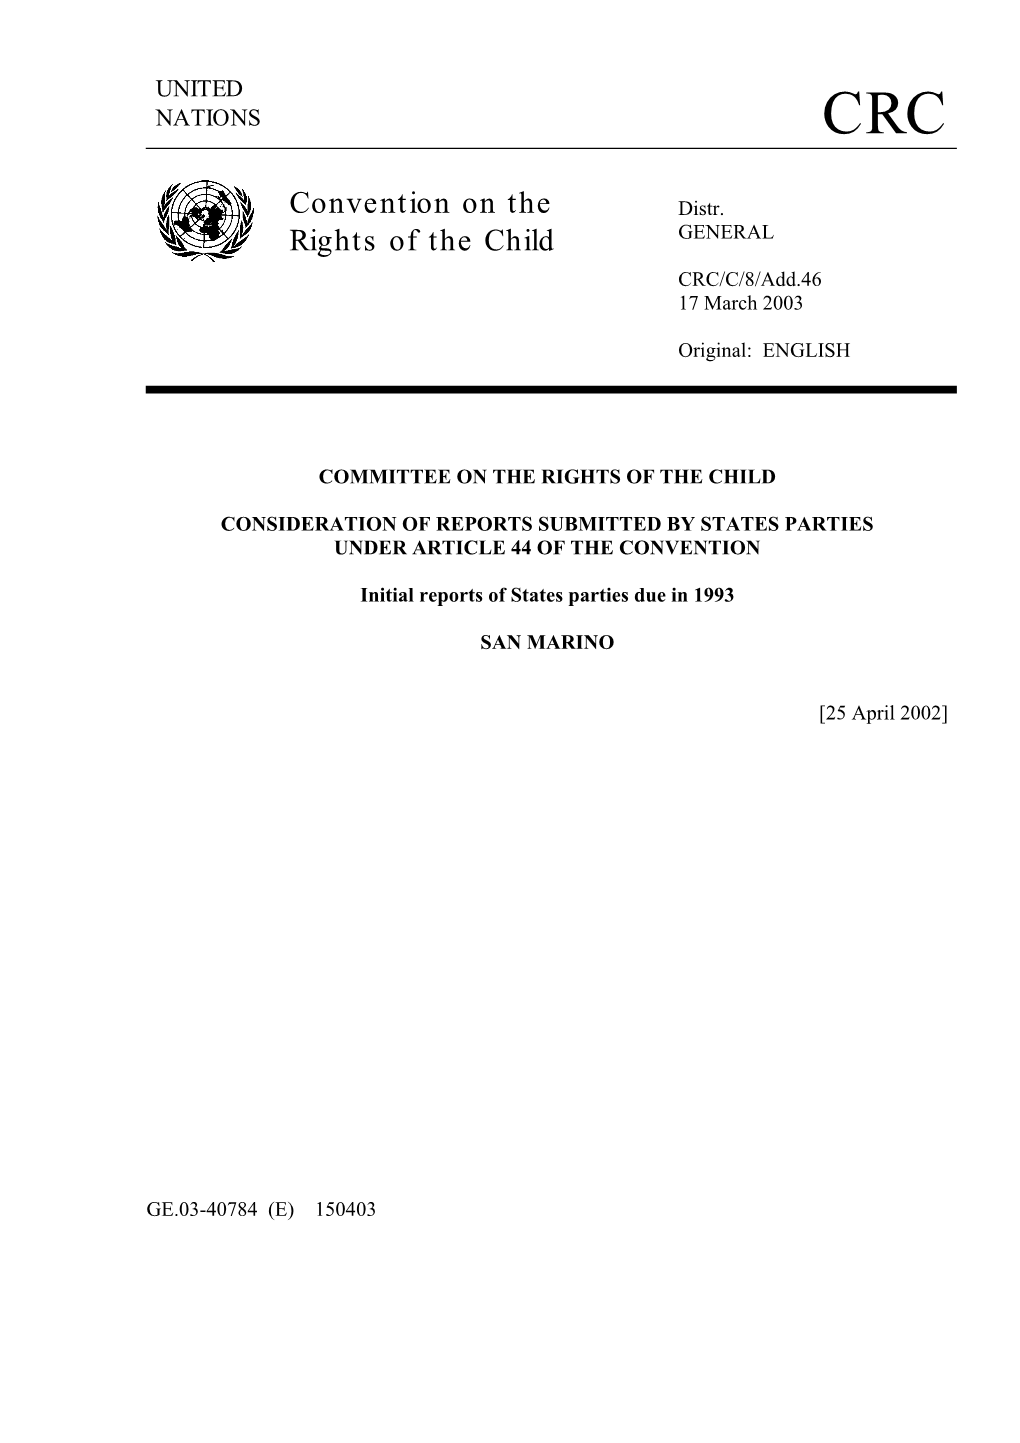 Convention on the Rights of the Child, Was Prepared by the Ministry of Foreign Affairs, in Collaboration with Other Competent Ministries and Government Offices